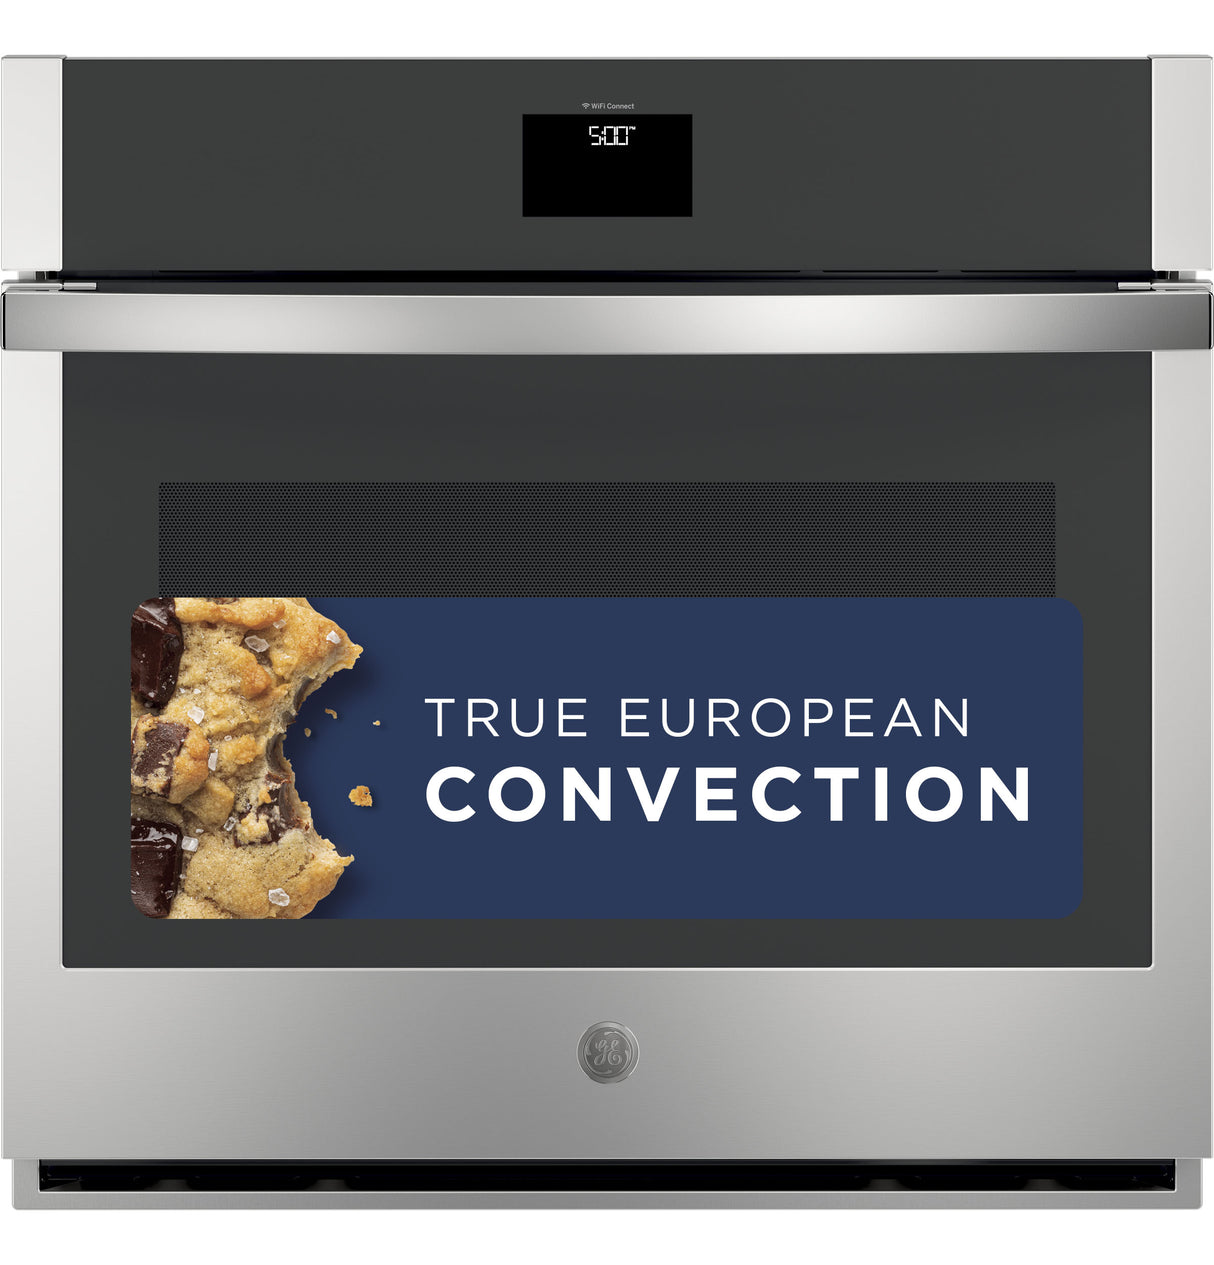 GE(R) 30" Smart Built-In Self-Clean Convection Single Wall Oven with Never Scrub Racks - (JTS5000SNSS)